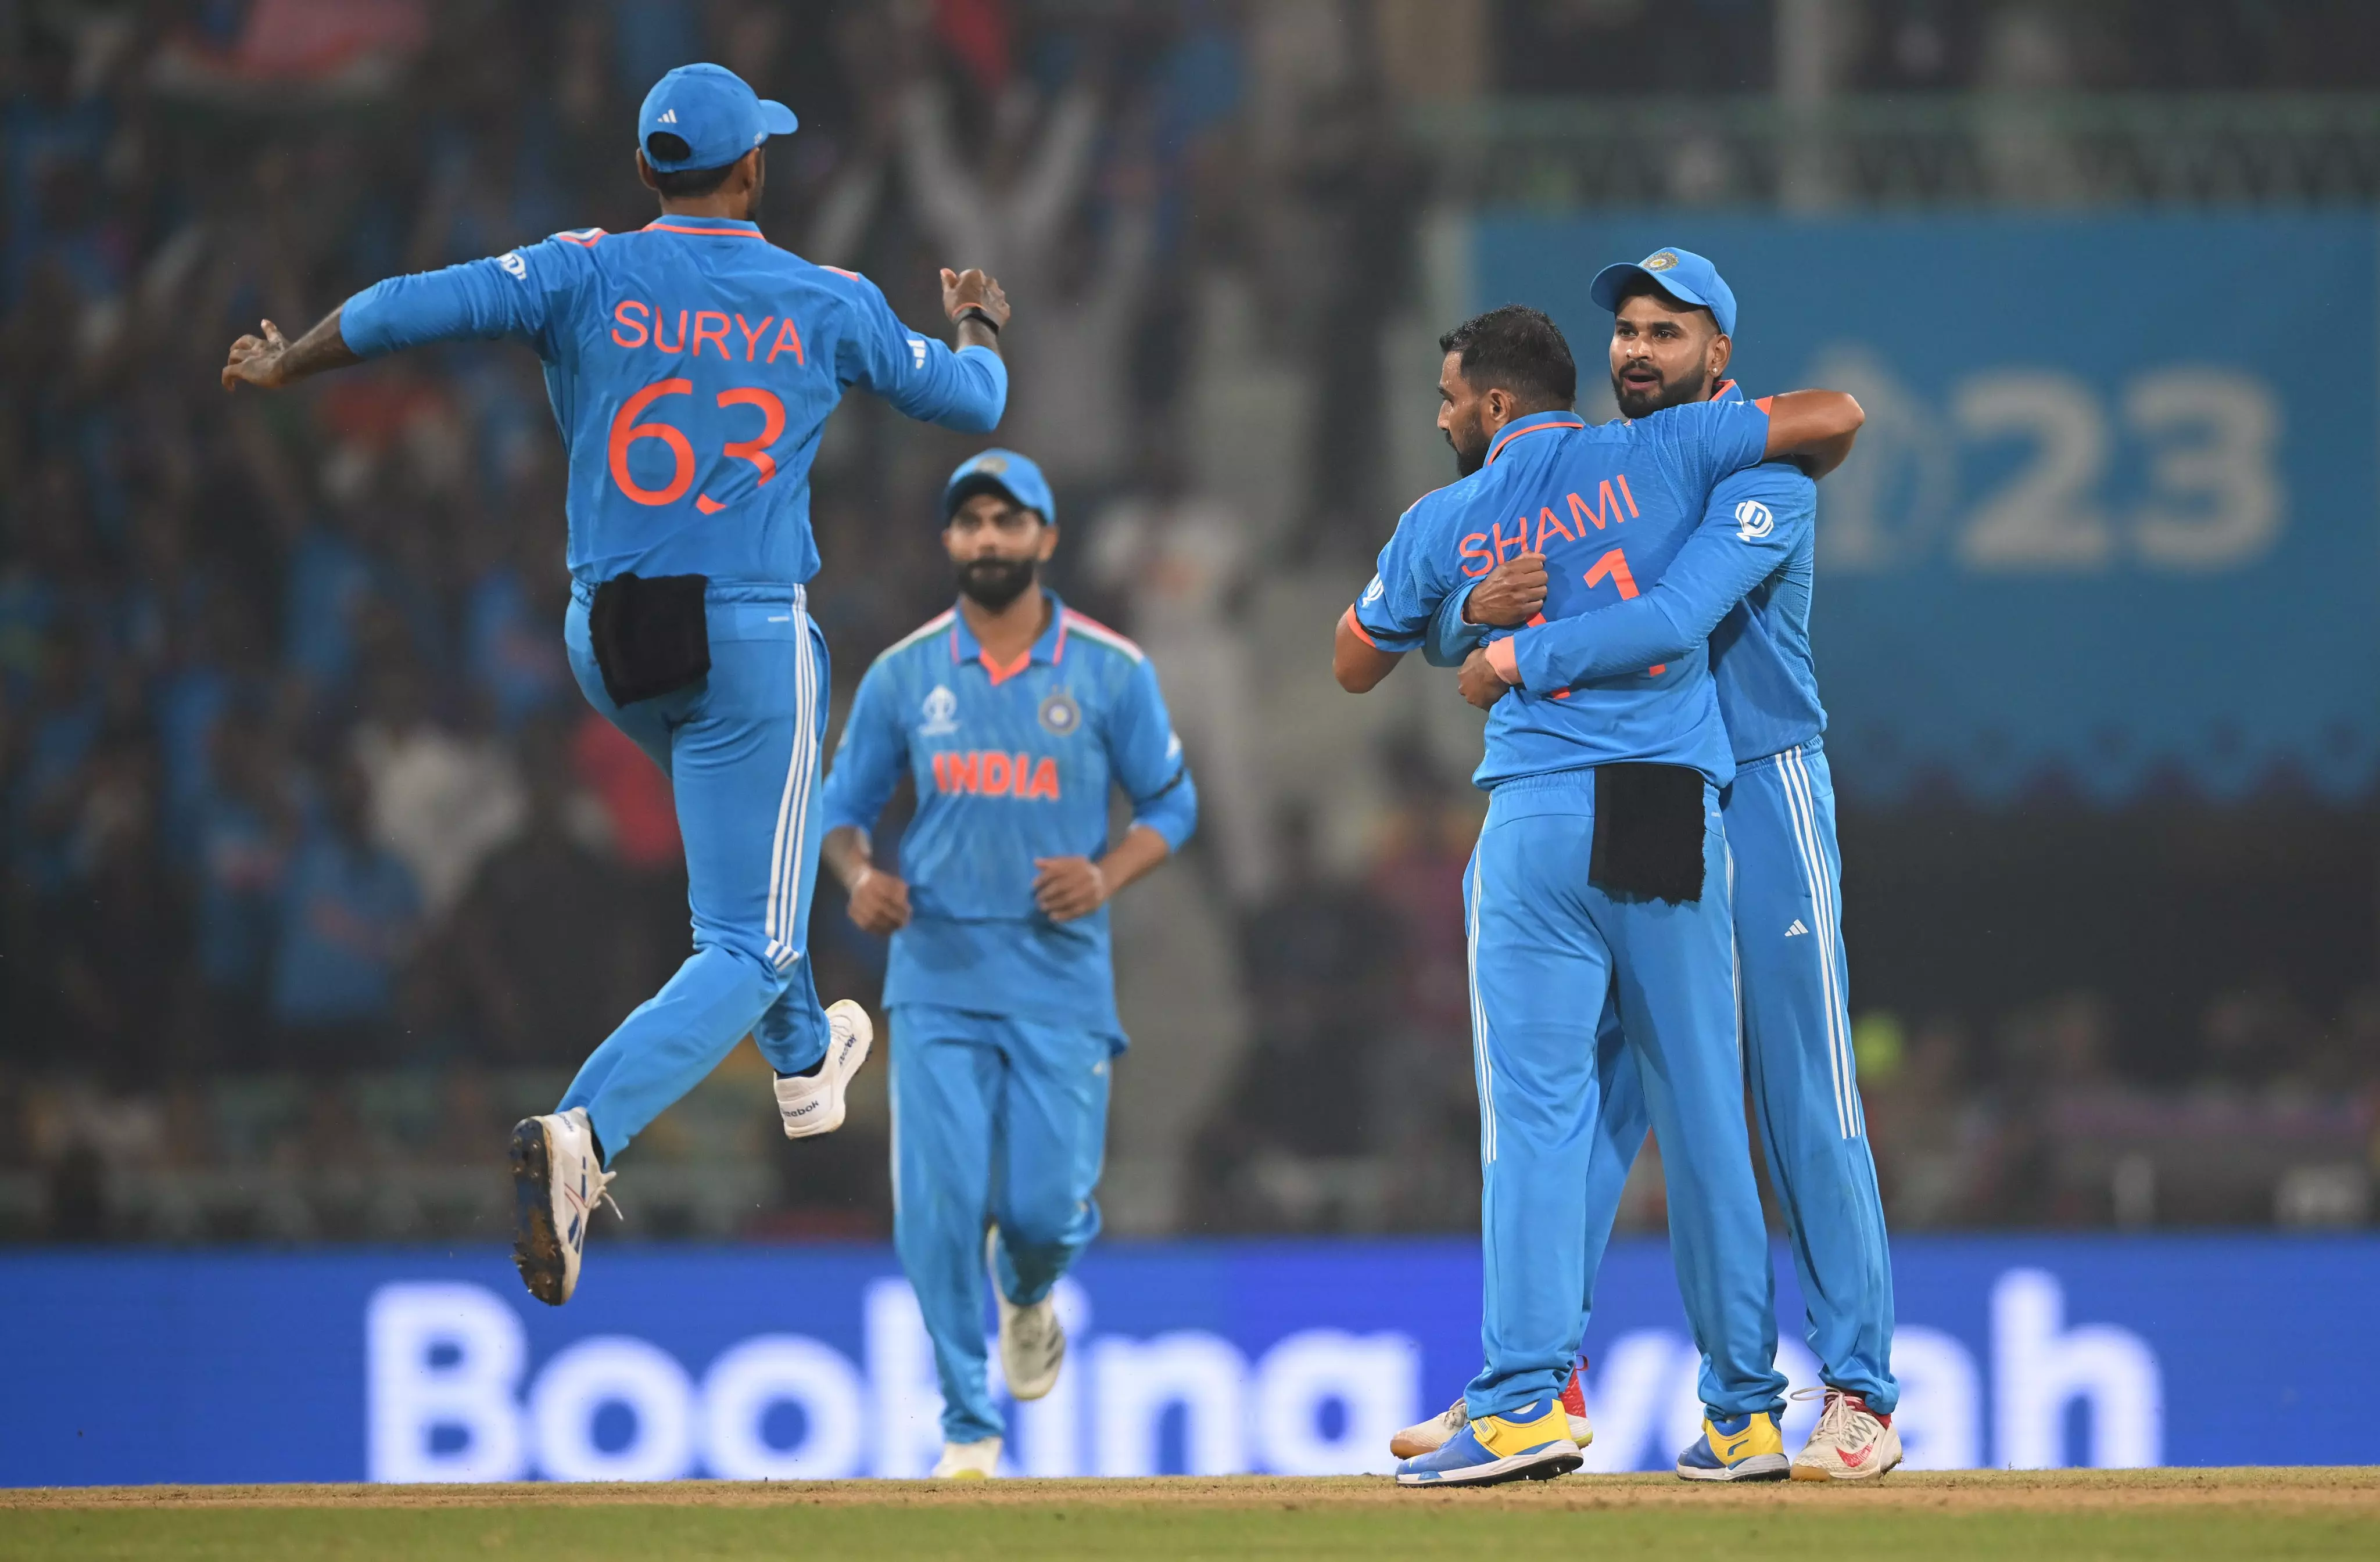 India vs England Live Score, World Cup: Unbeaten India make it 6 wins in a row